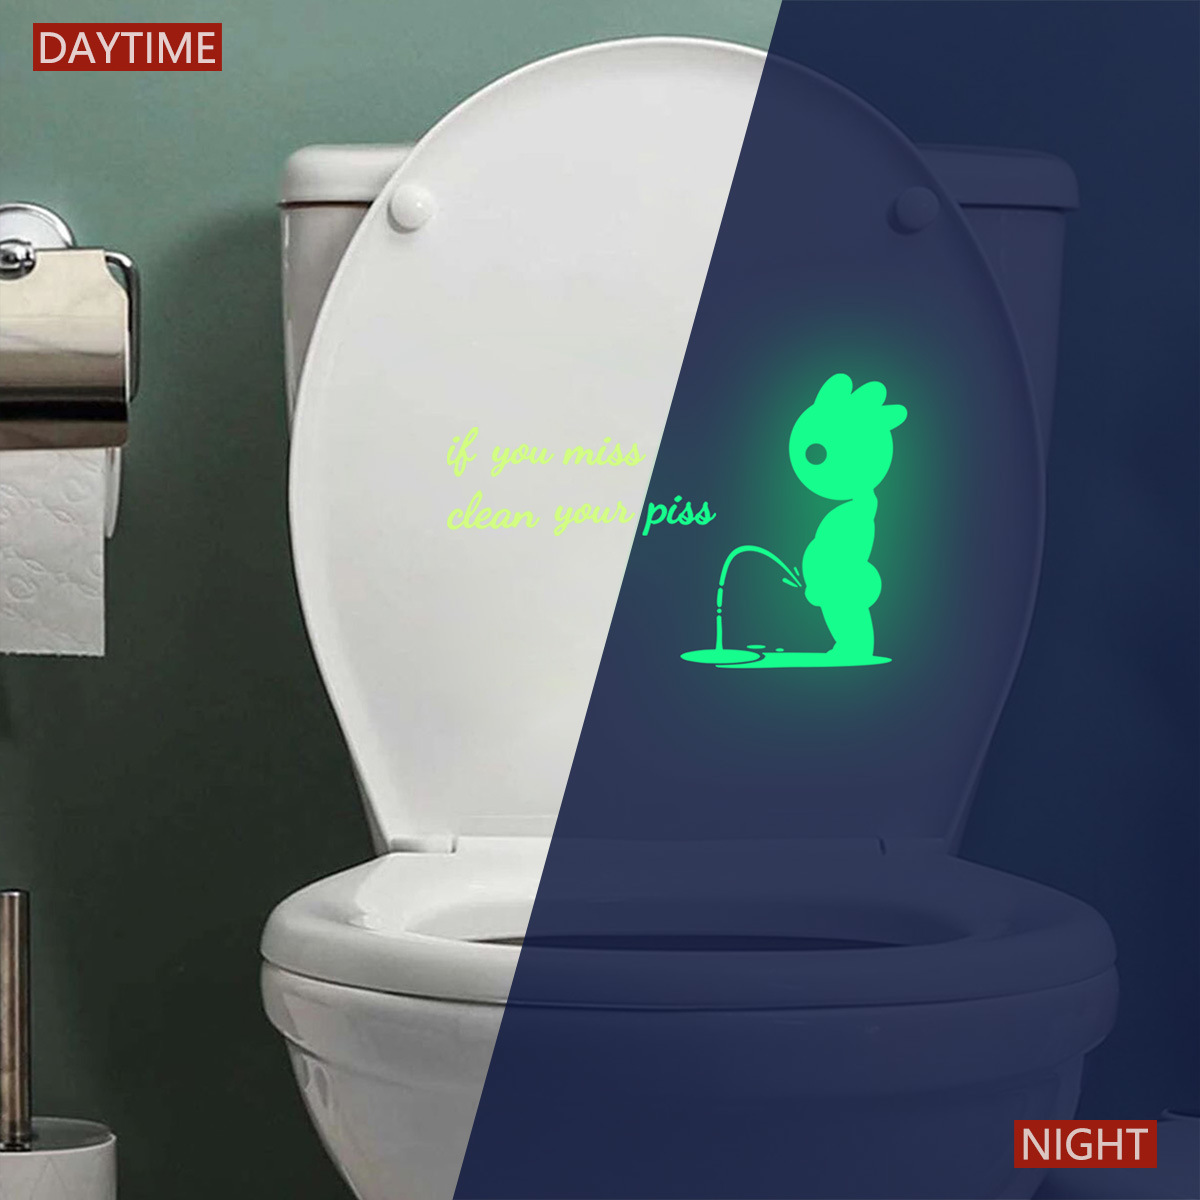 Does your toilet glow? 